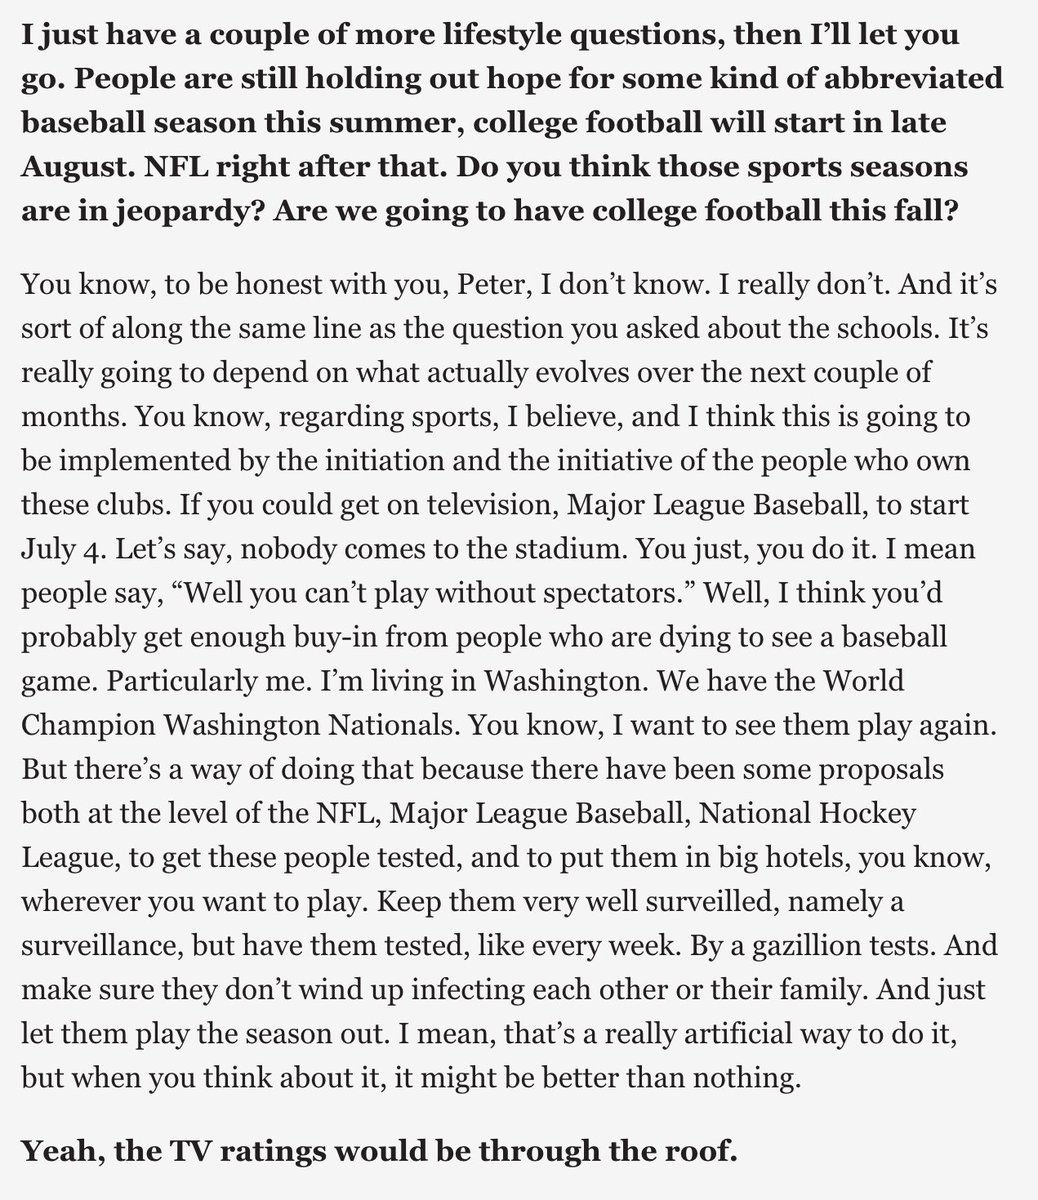 11/ Baseball in 2020? Hope so (esp for my son Doug; does Moneyball  @braves). In  @vanityfair intervu  https://bit.ly/2VuZqgE  Fauci addresses it (& lots else). His verdict: Let’s Play ball! Start July 4, sans fans. Economics might be dicey for  @MLB, but would be a huge salve for US